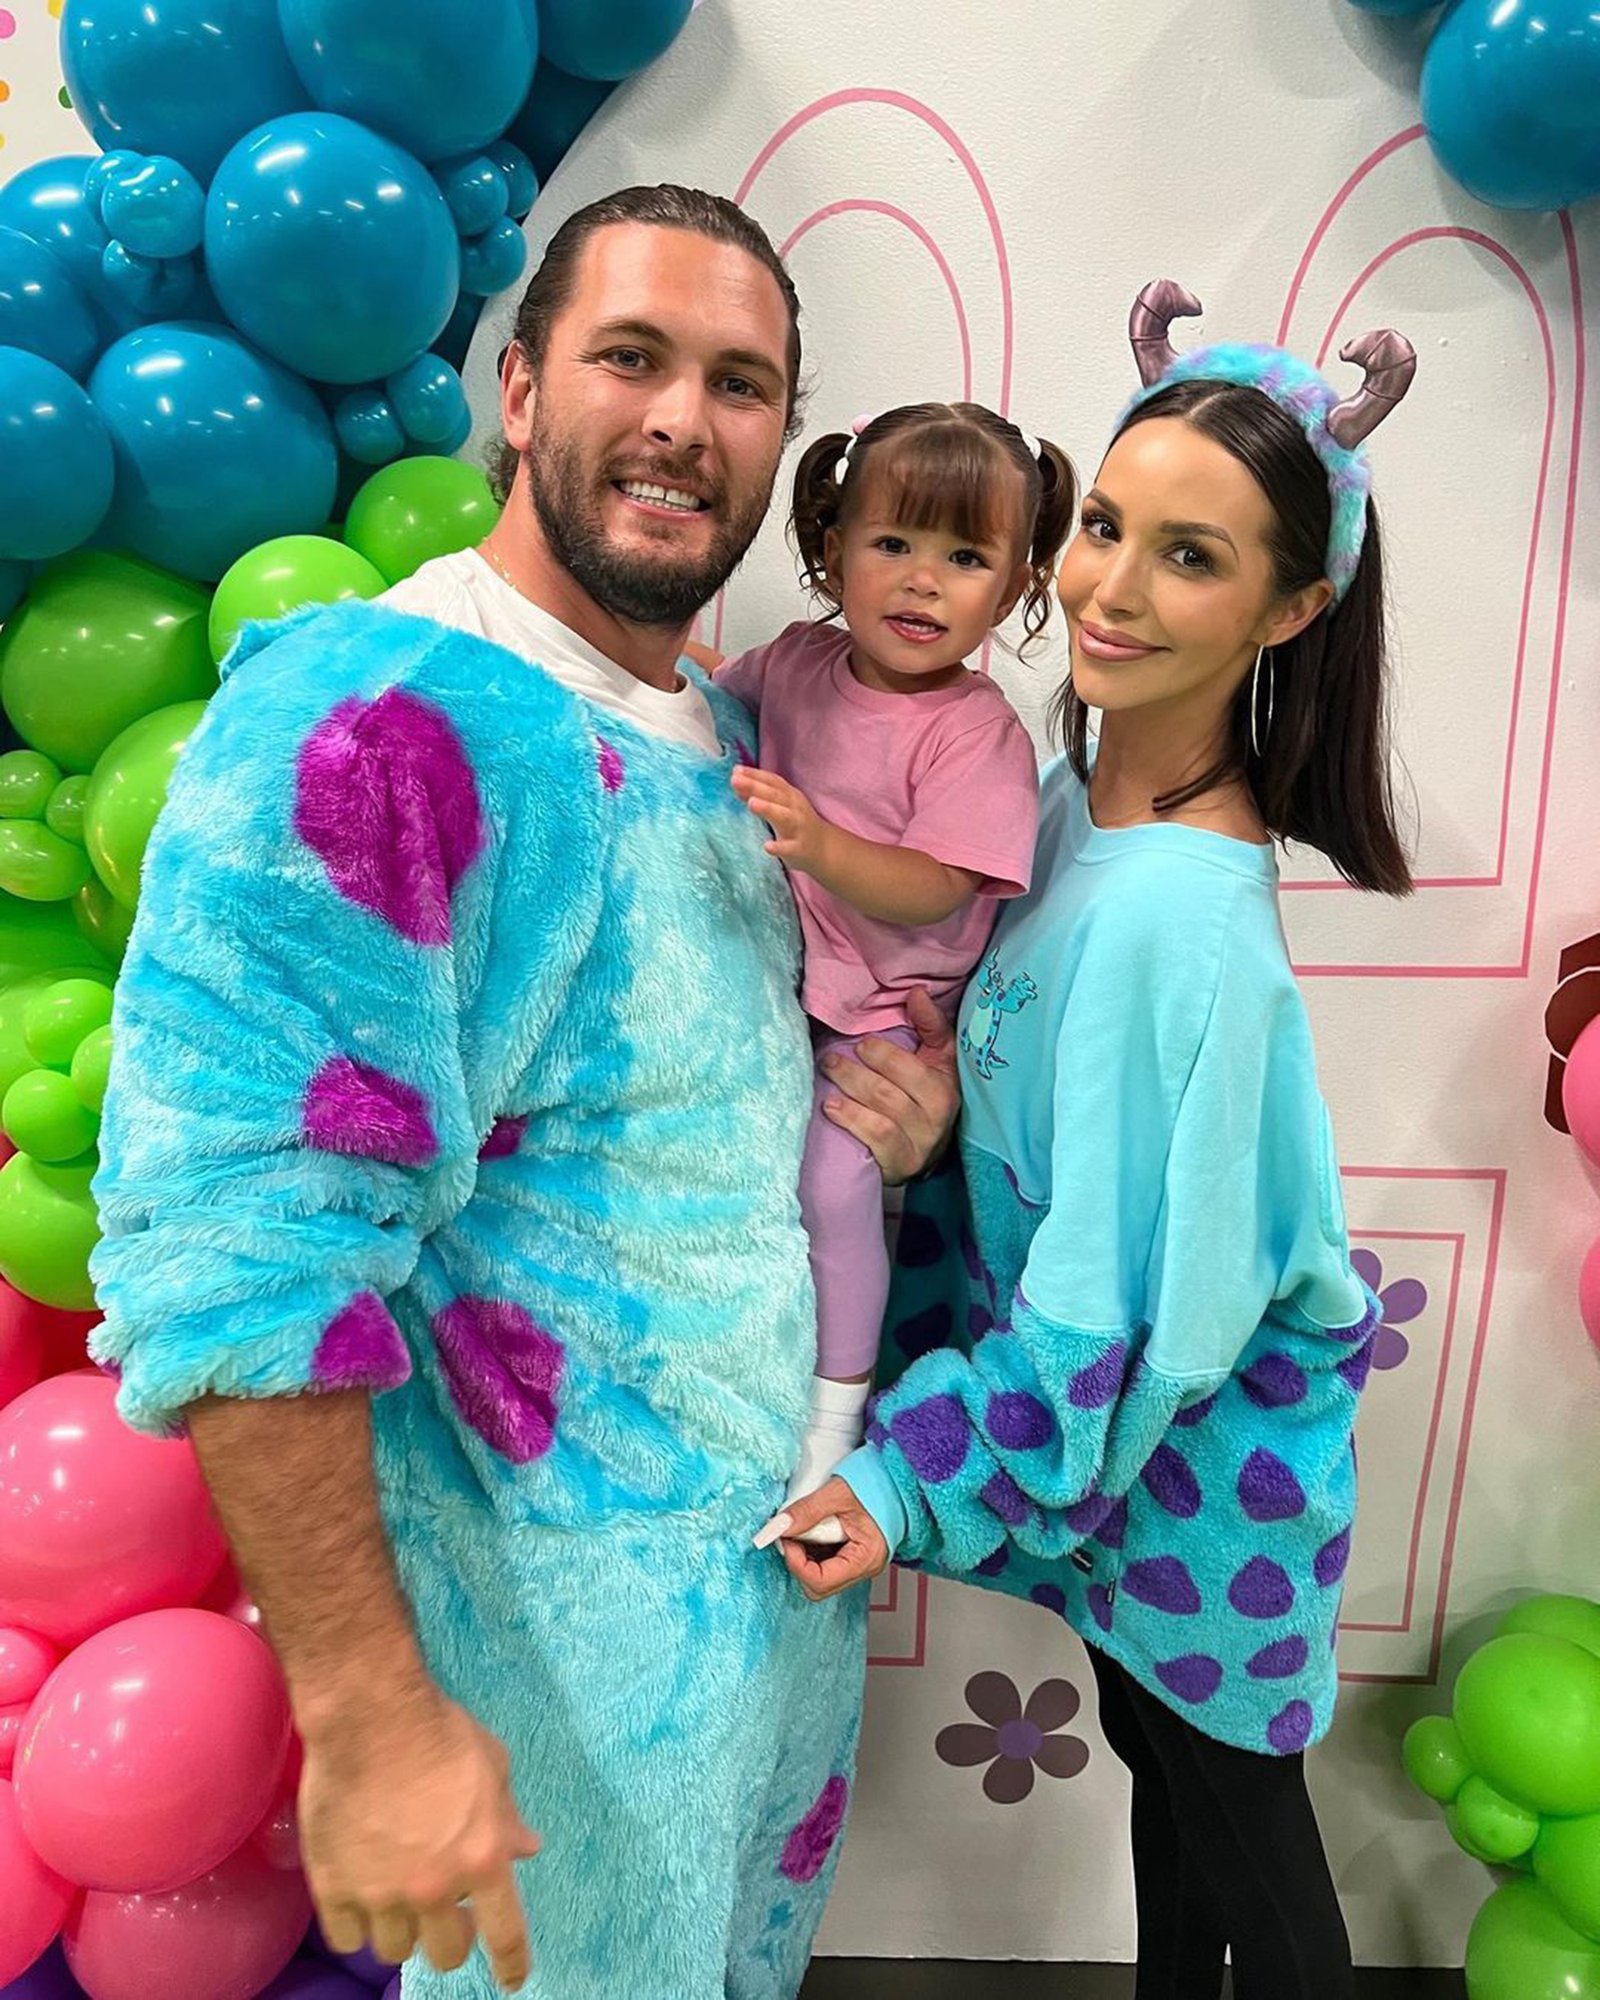 Scheana Shay and Brock with their daughter in costume.